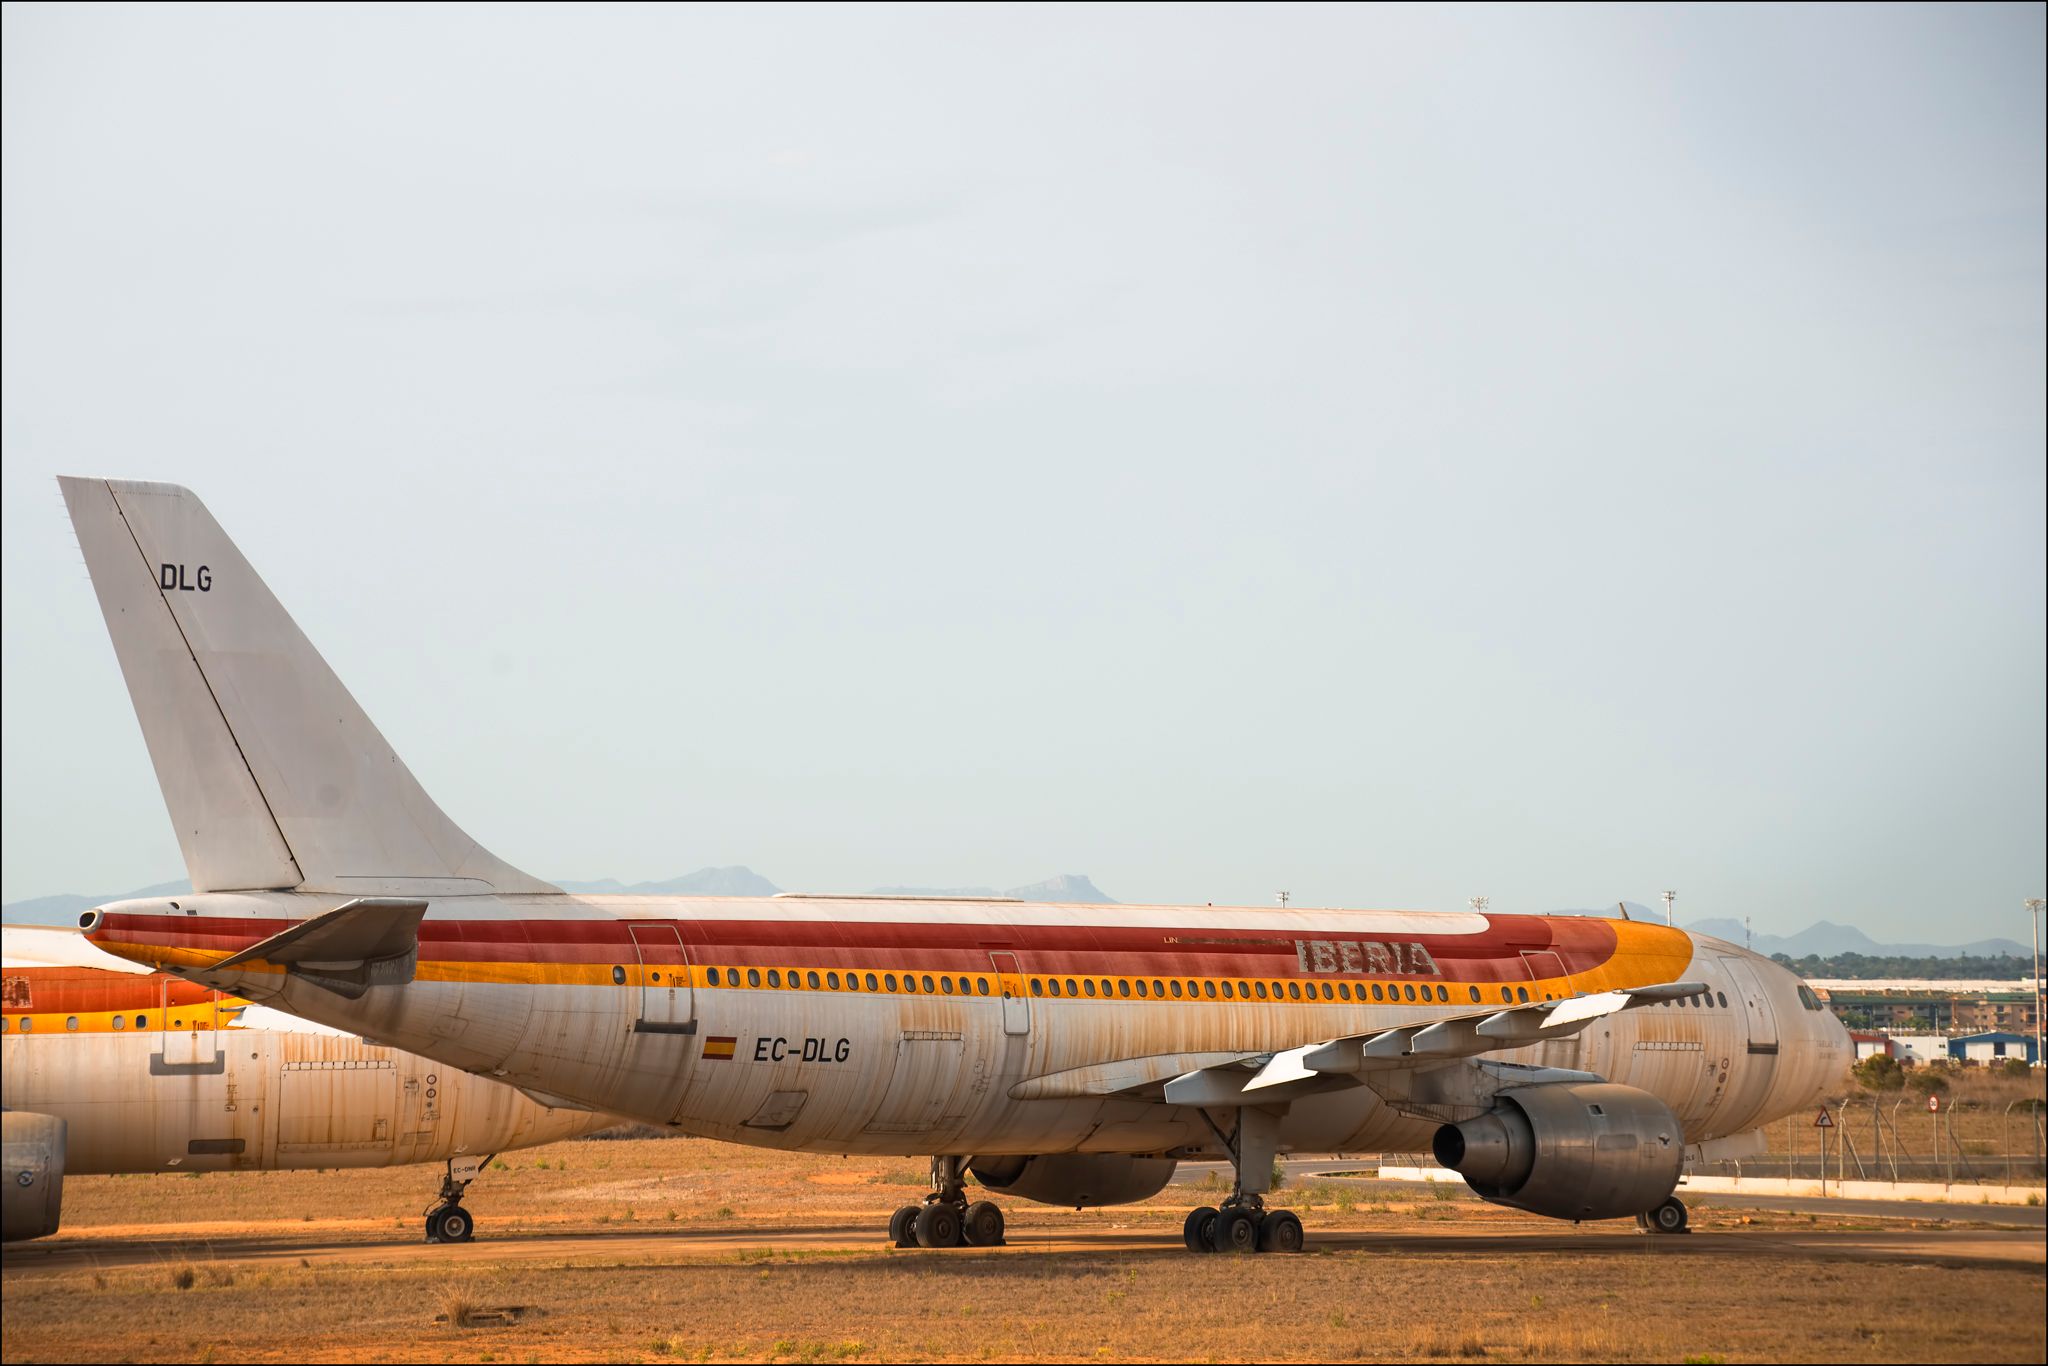 An old Iberia Airbus A300 parked at an airfield.